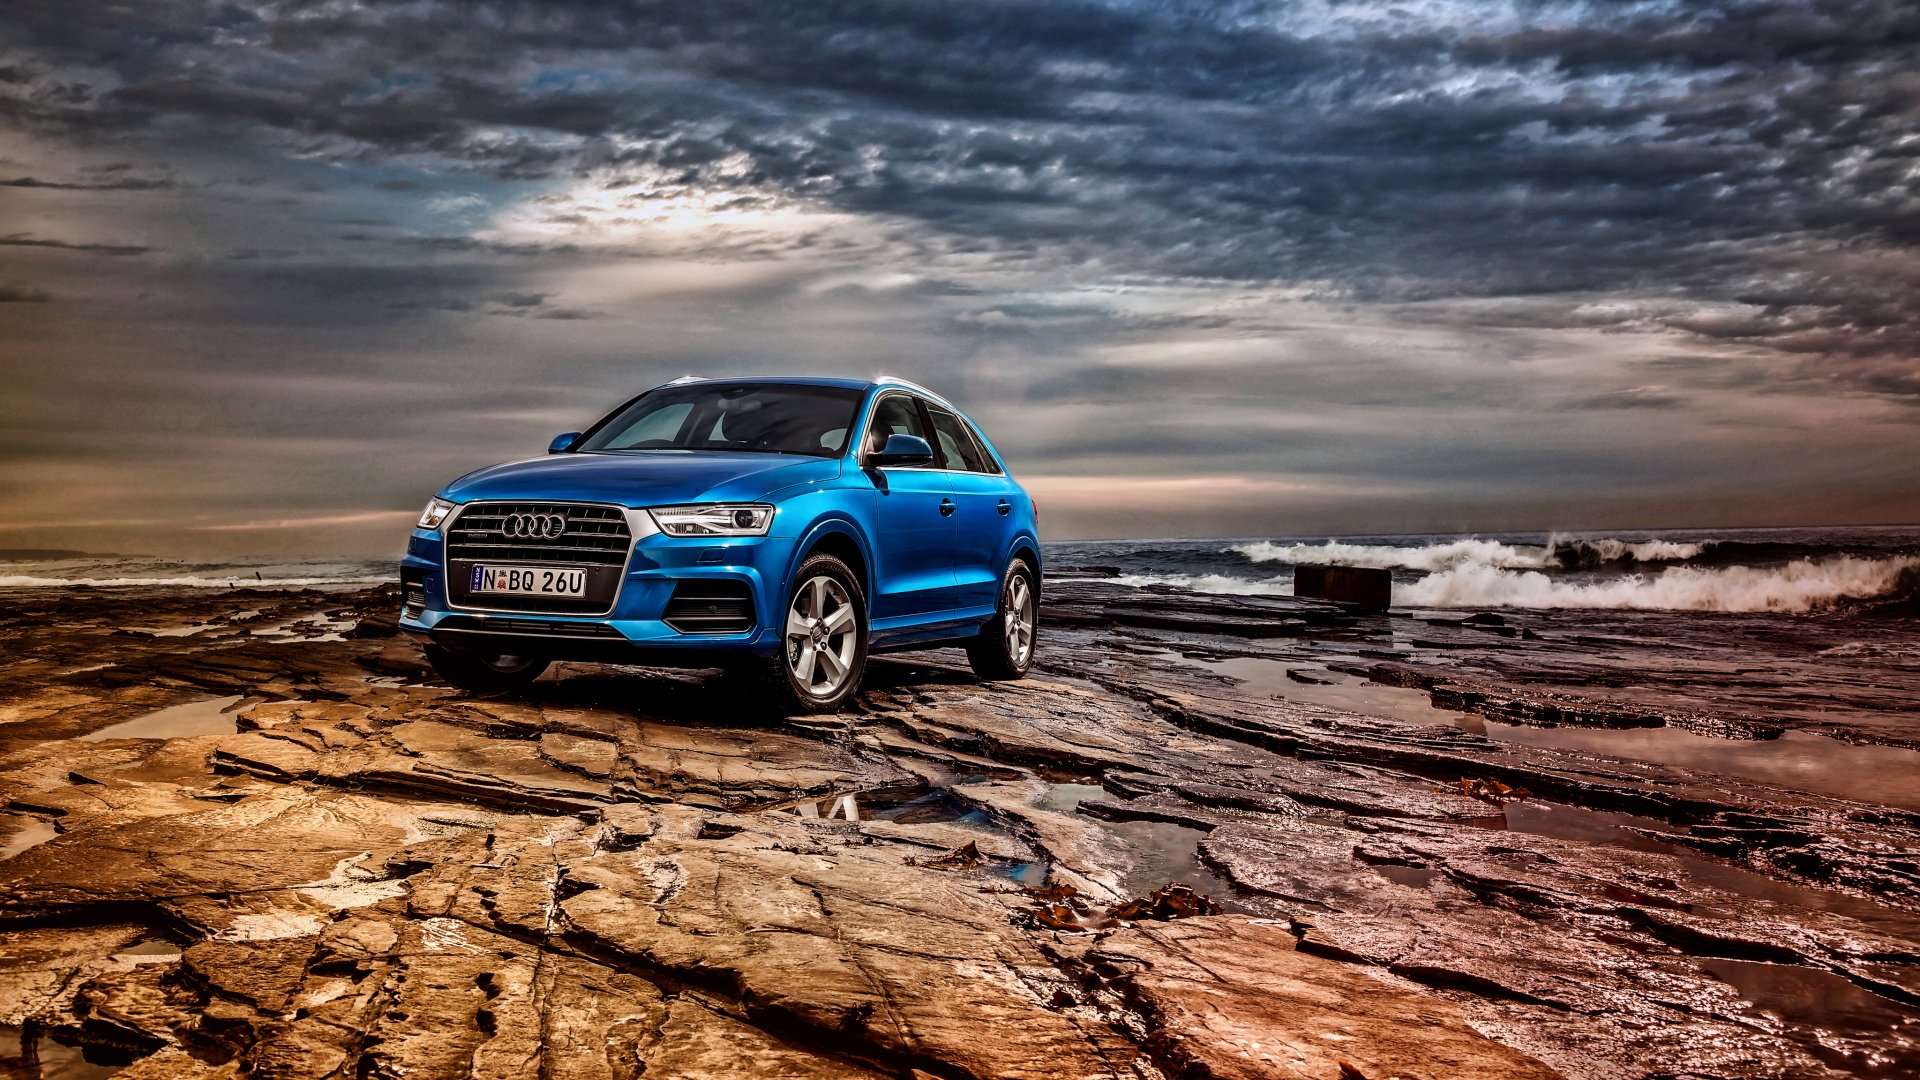 20 4k Ultra Hd Audi Q3 Wallpapers Background Images